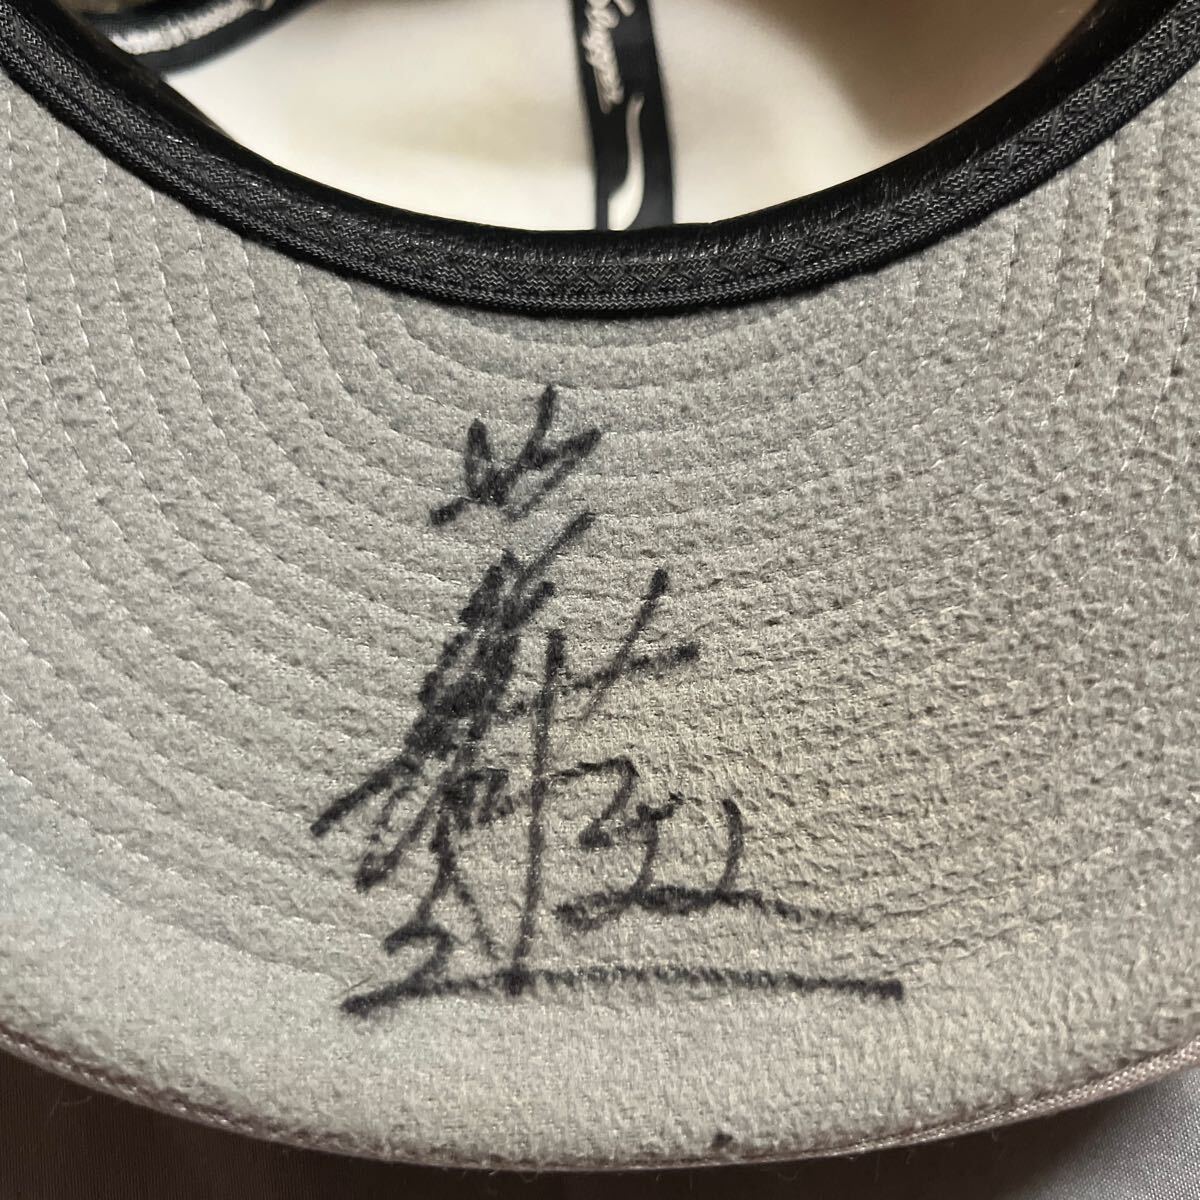  Hanshin Tigers black rice field player actual use cap wistaria river lamp . autographed size not yet chronicle 